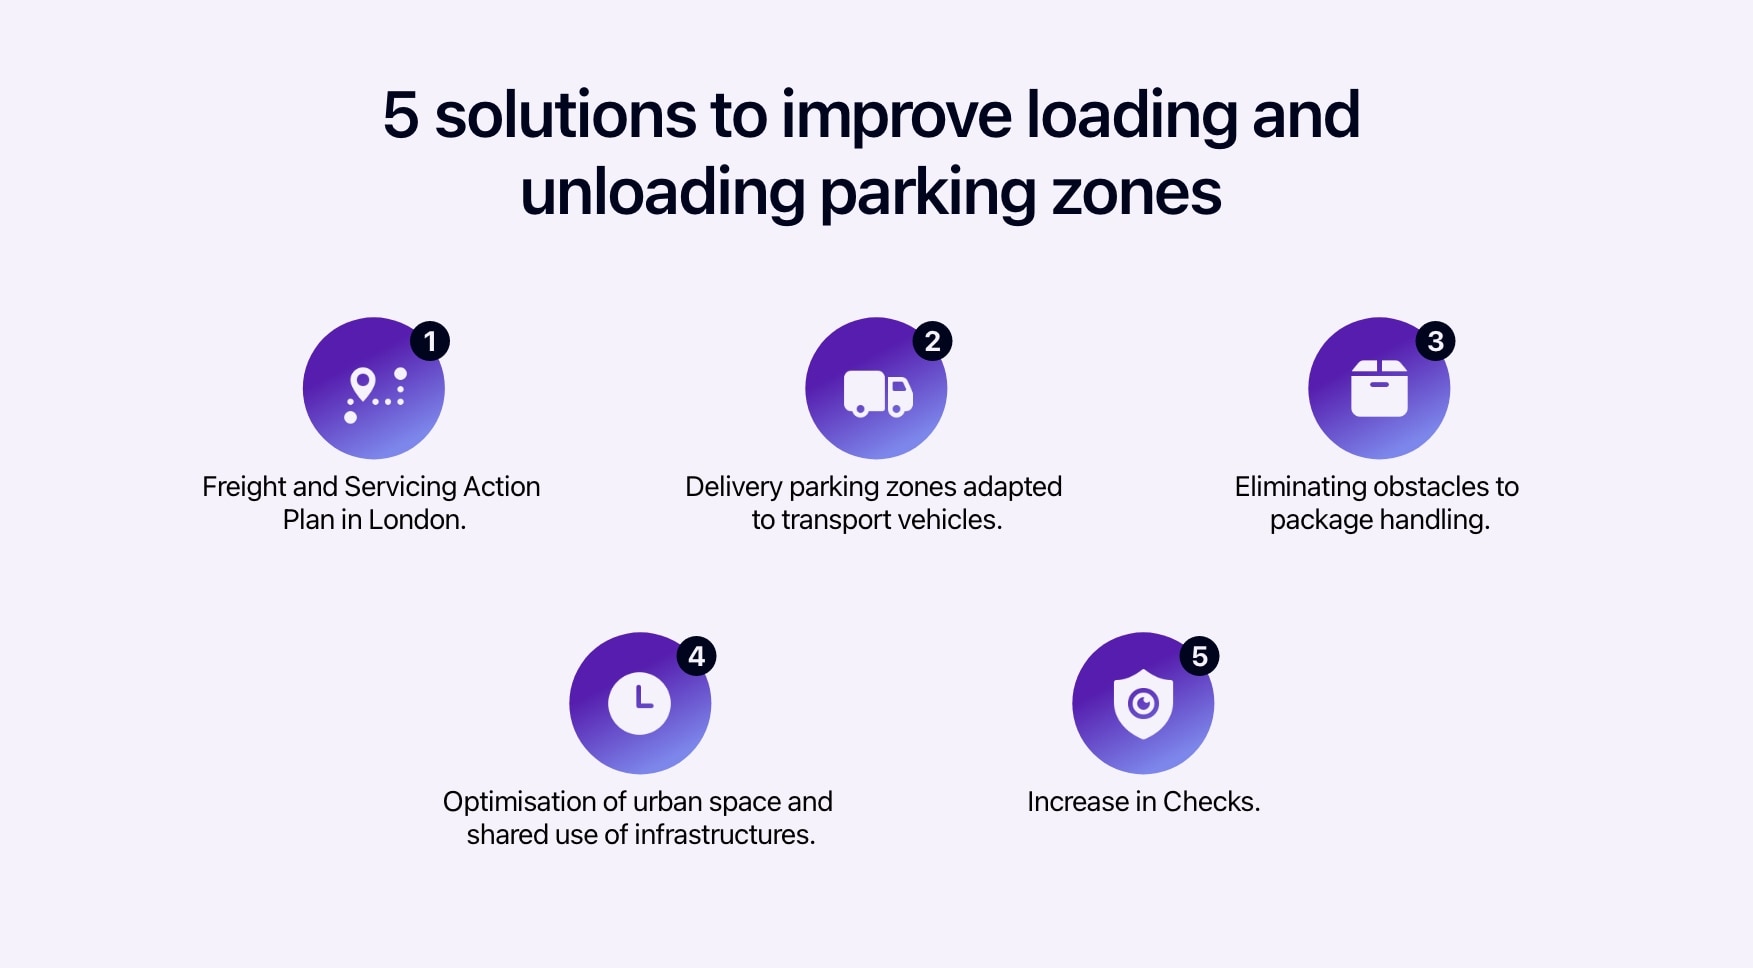 Diagram showing 5 solutions for improving delivery parking zones.